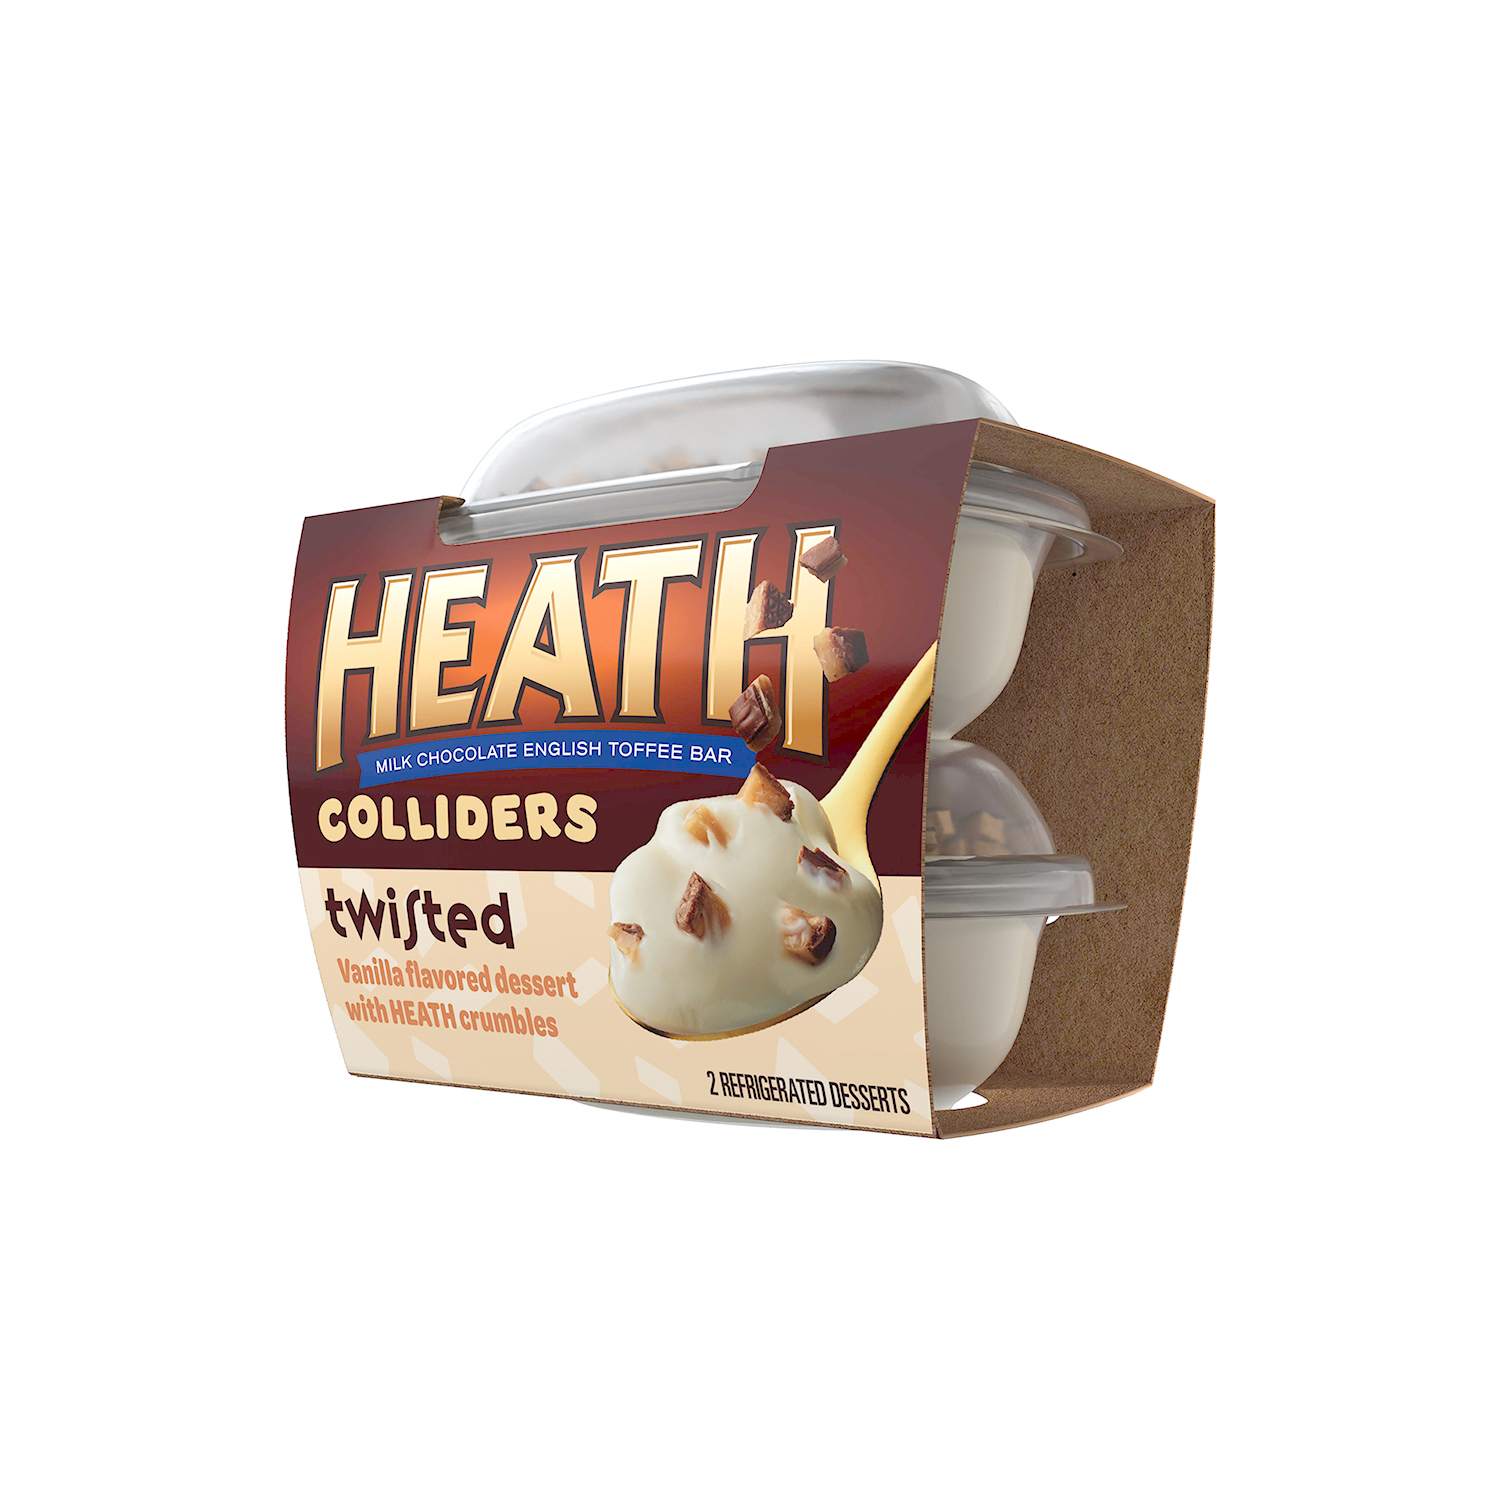 HEATH COLLIDERS™ Twisted Dessert, 7 oz, 2 pack - Right of Package